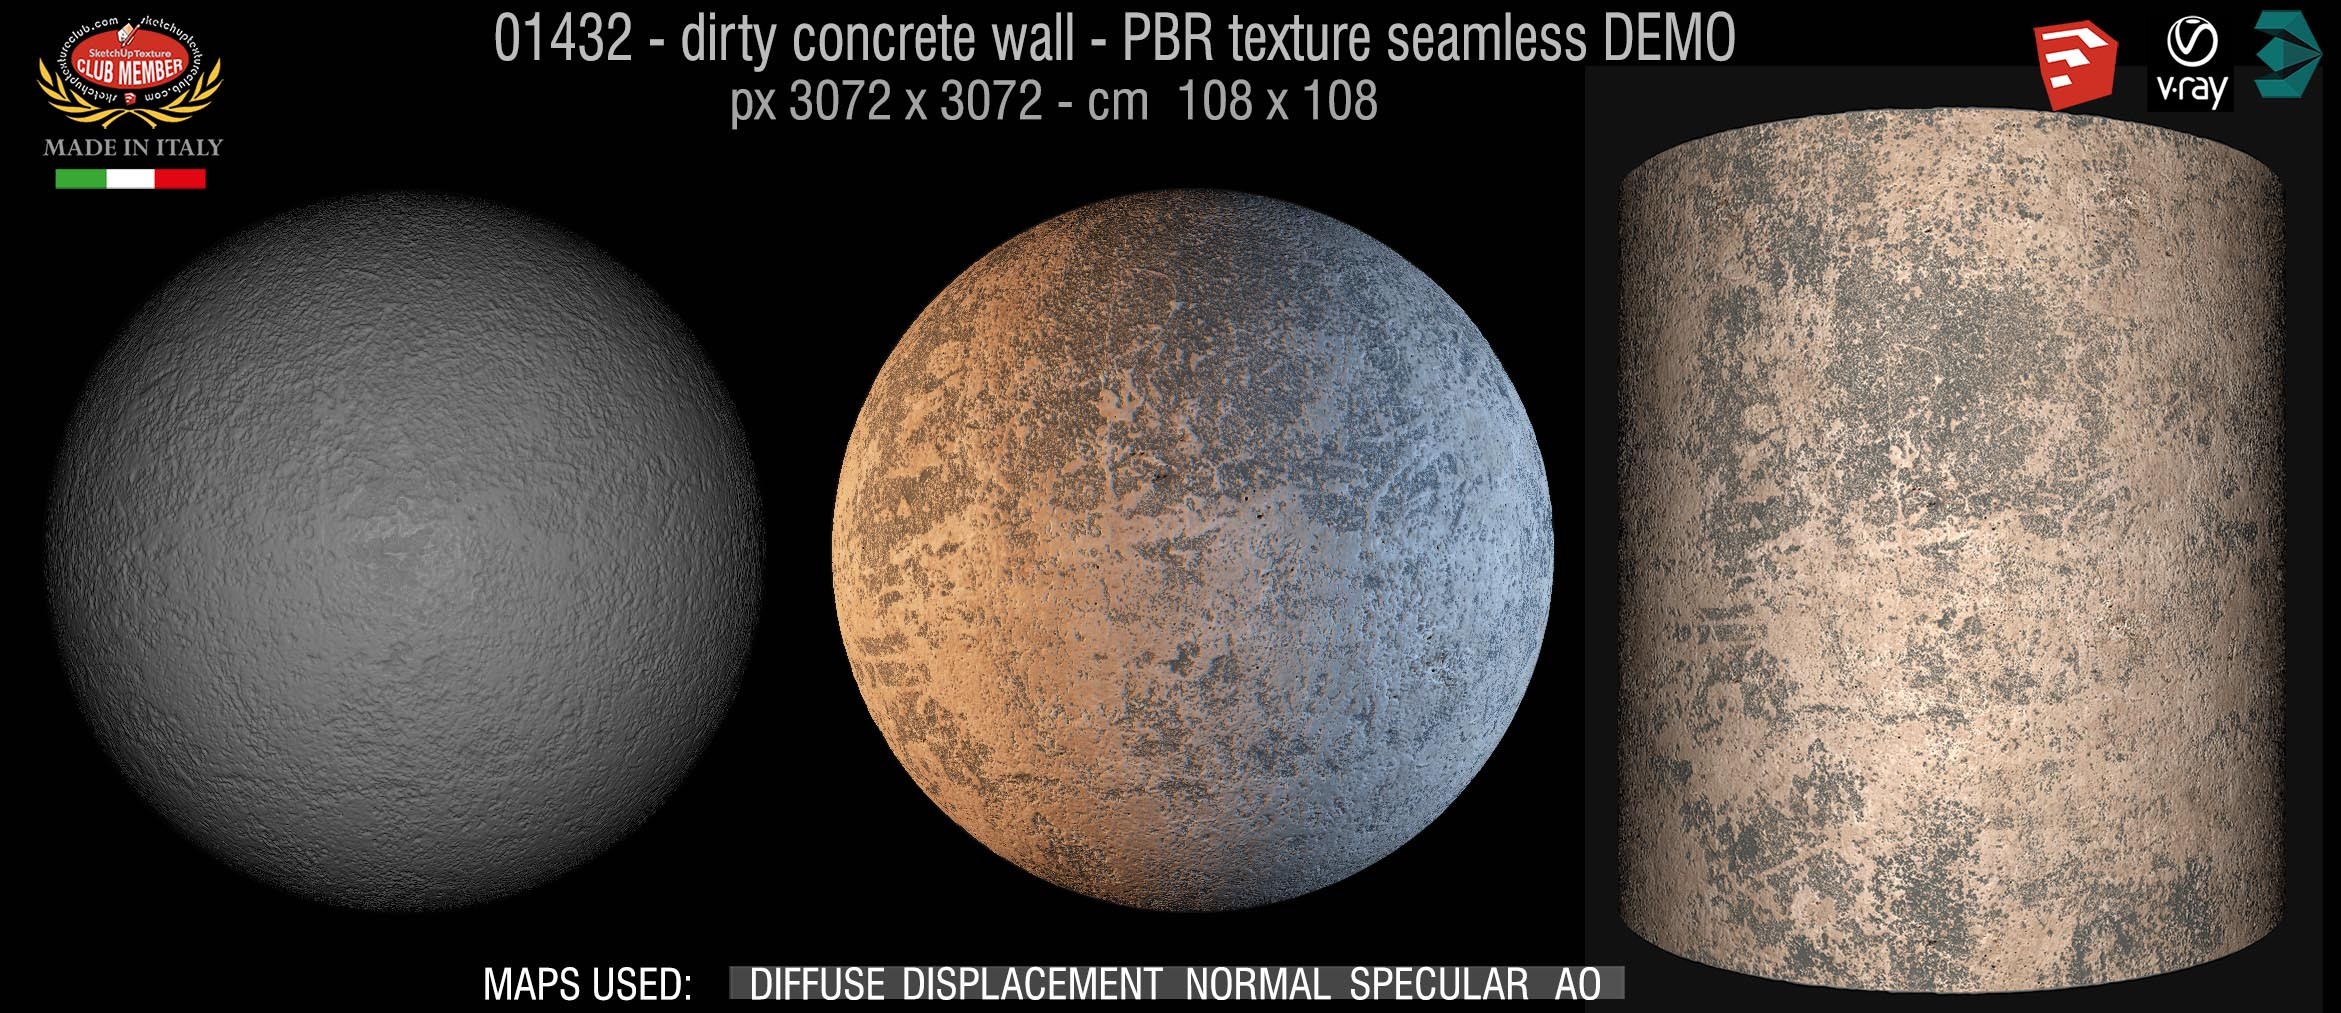 01432 Concrete bare dirty wall PBR texture seamless DEMO